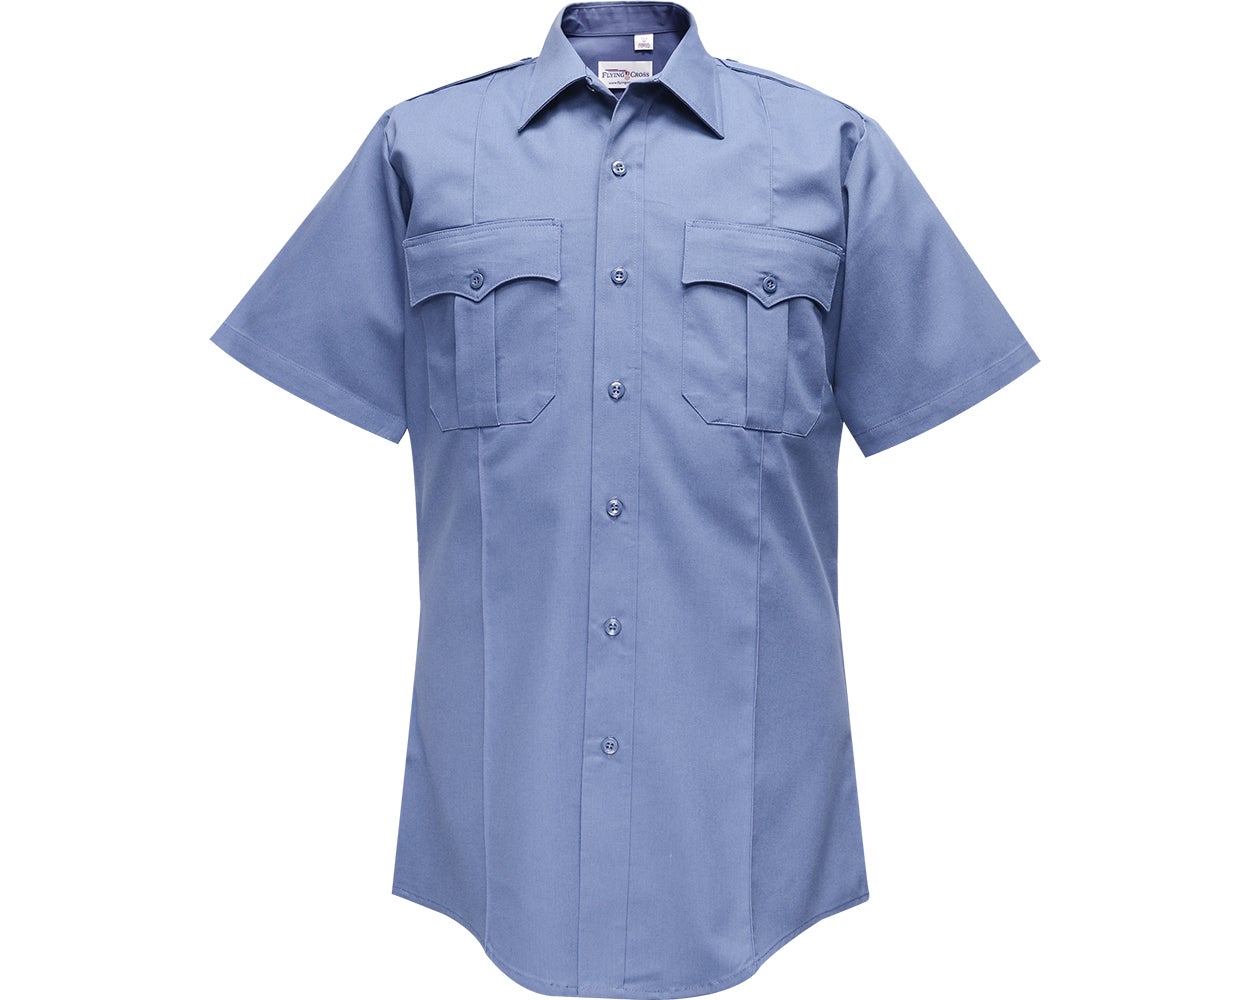 Flying Cross Duro Poplin 65% Poly/35% Cotton Men's Short Sleeve Uniform Shirt with Sewn-In Creases 85R54 - Marine Blue, 16